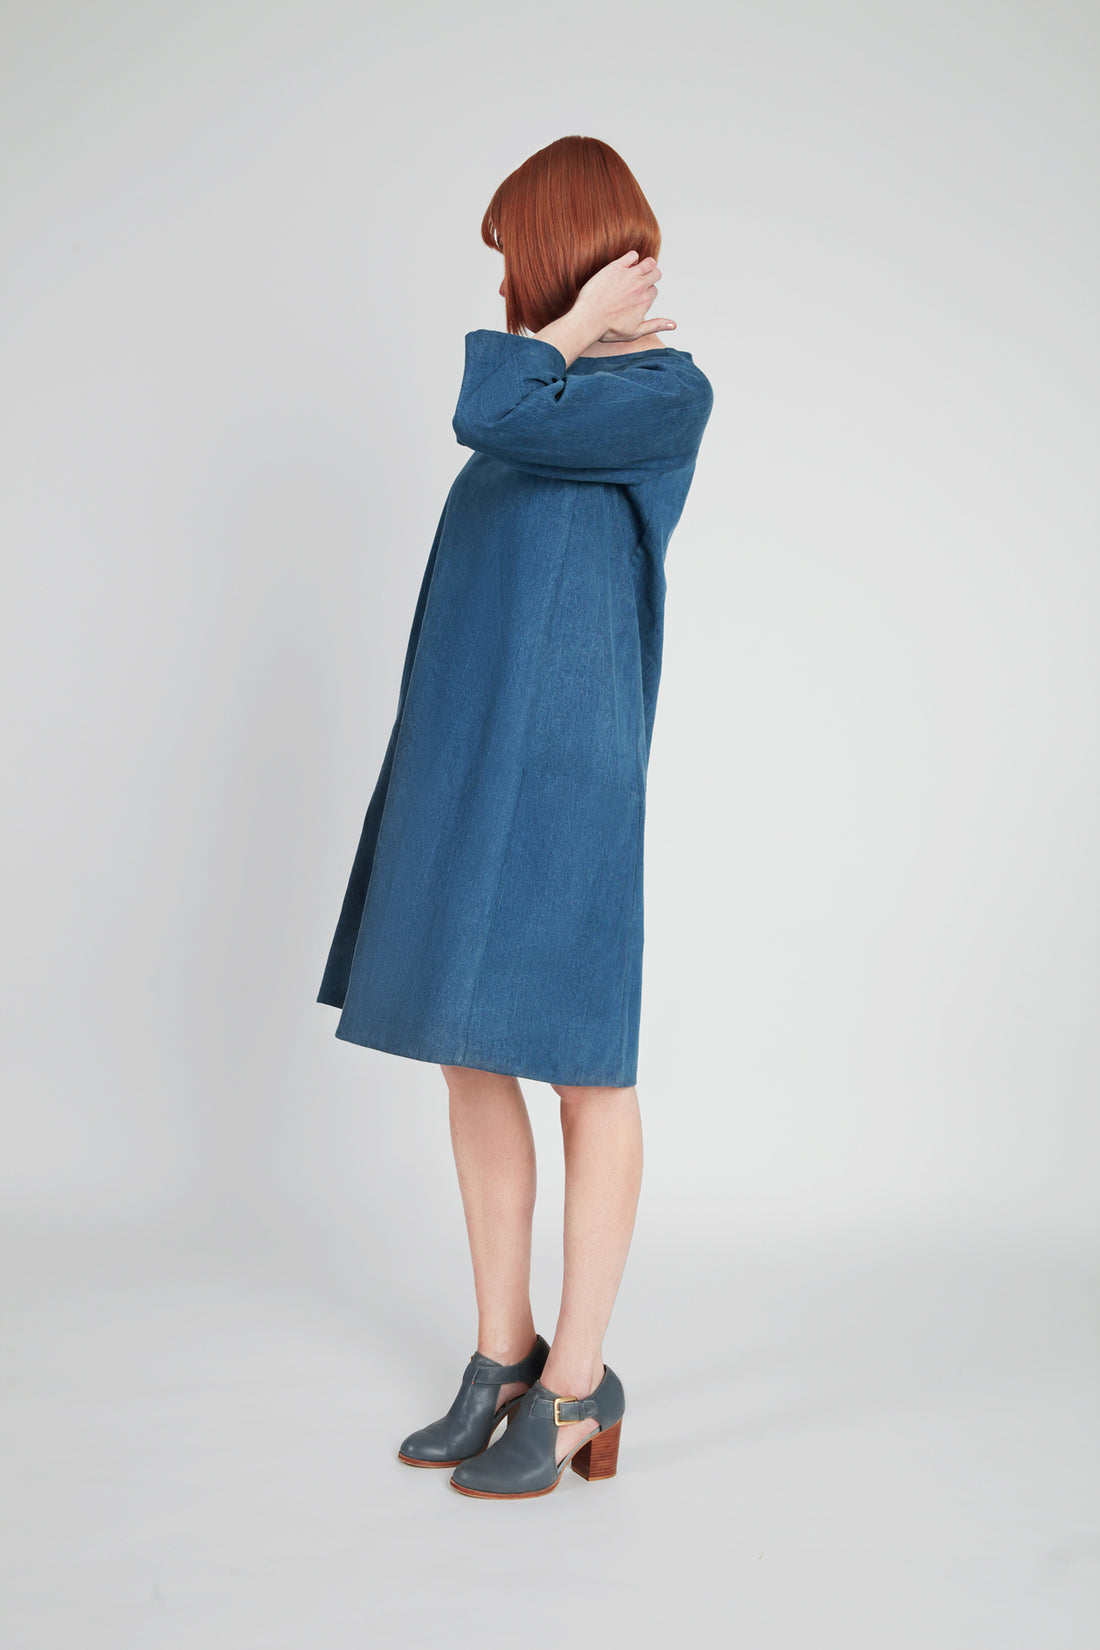 In the Folds - Rushcutter Dress